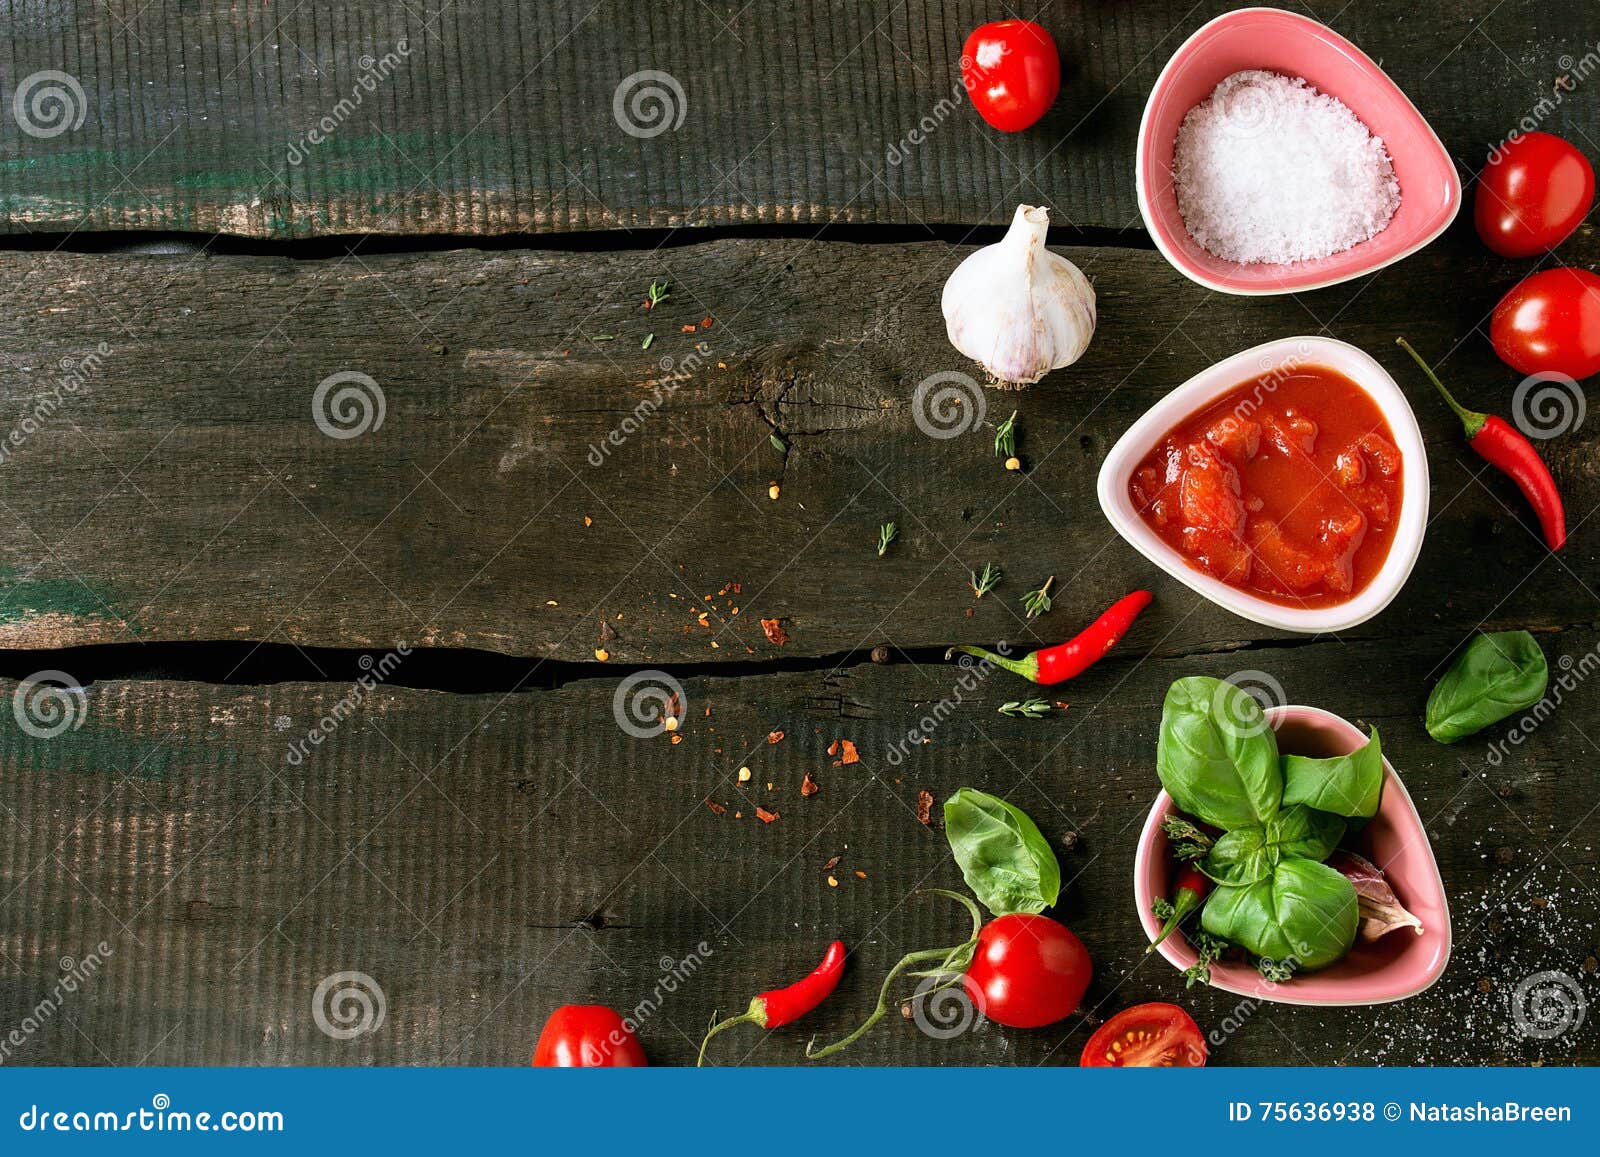 Ingredients for Making Ketchup Stock Photo - Image of rustic, dark ...